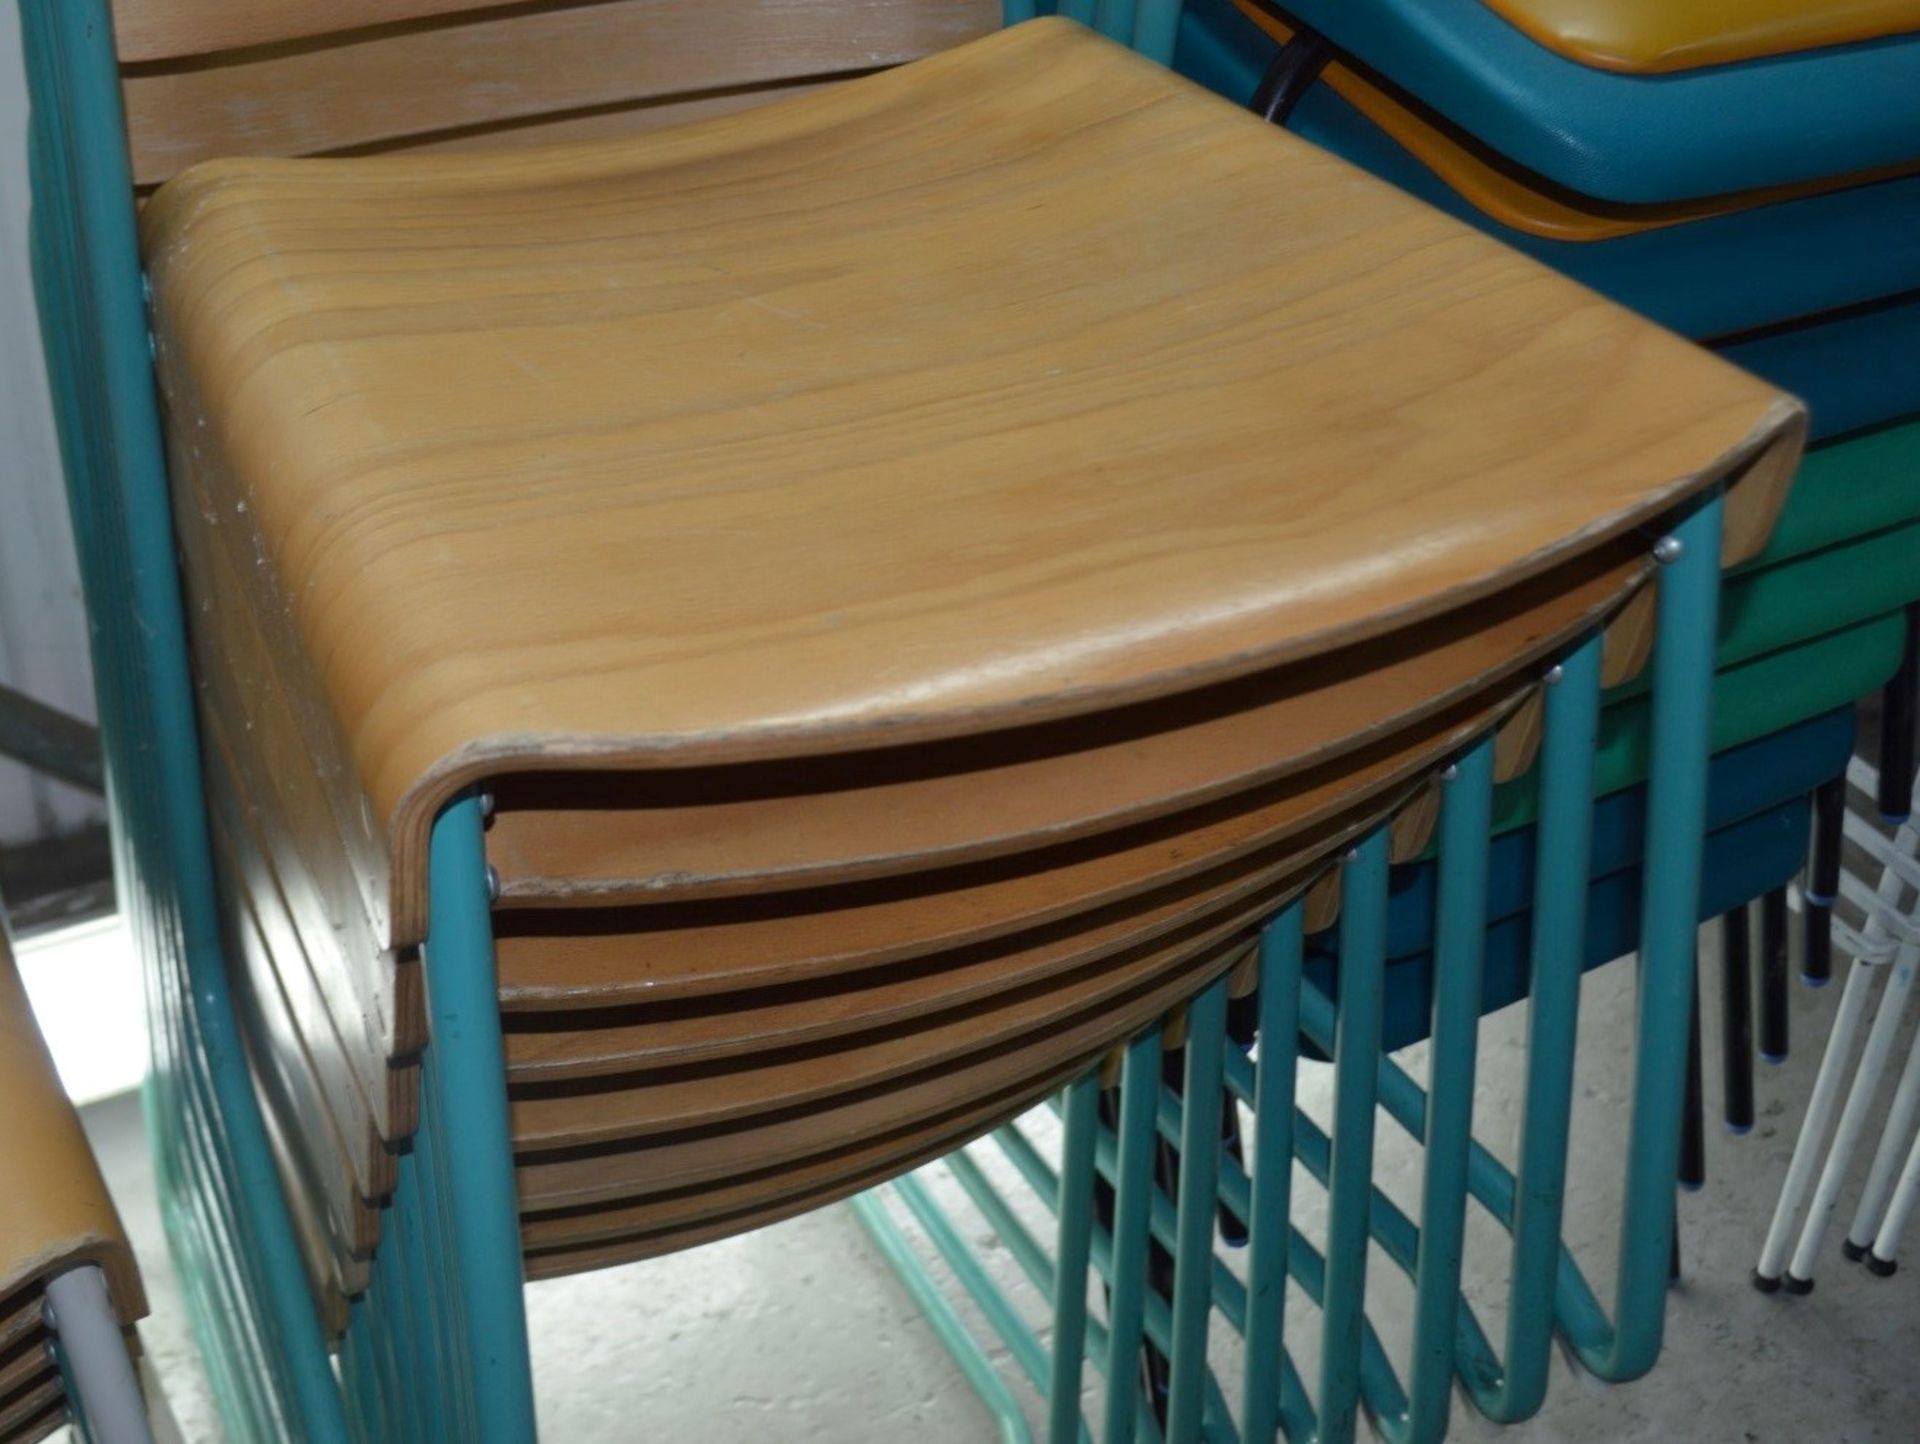 6 x Contemporary Stackable Bistro / Bar Chairs With Metal Frames With Curved Vanished Wooden Seats - Image 3 of 12